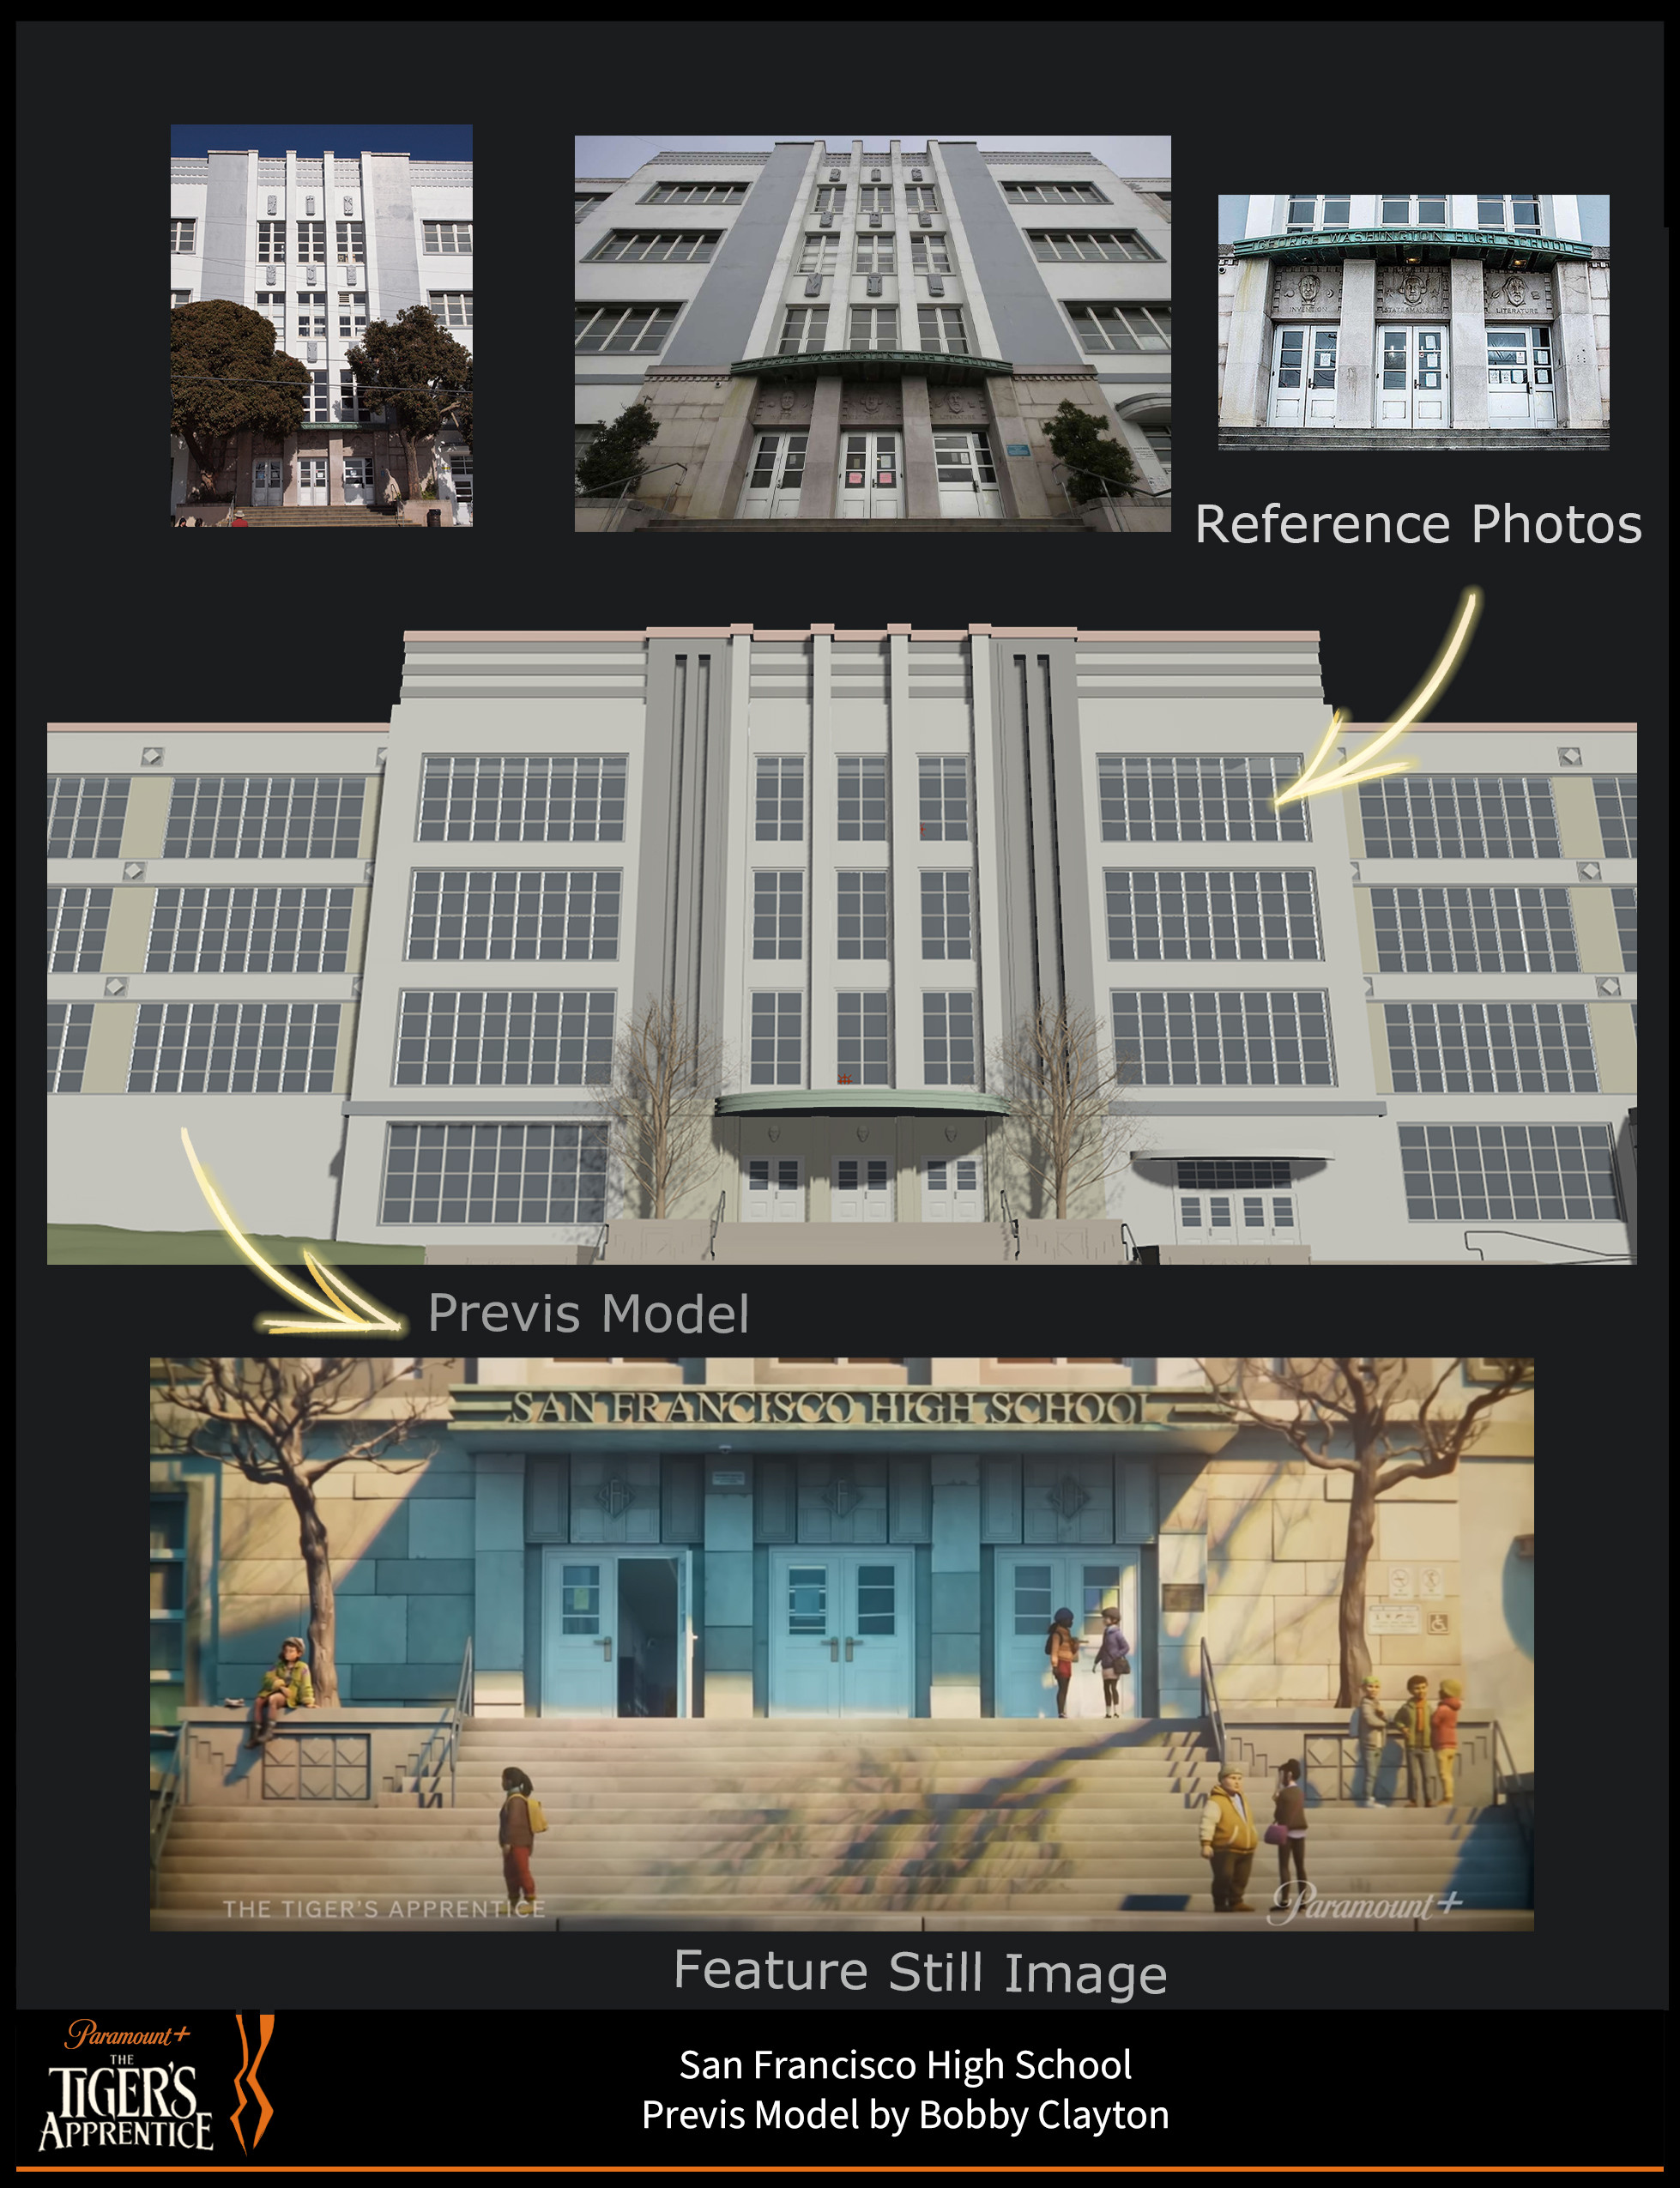 Back to back movies where I created the previs for the school exterior. This one was created based on reference photos of George Washington High School.